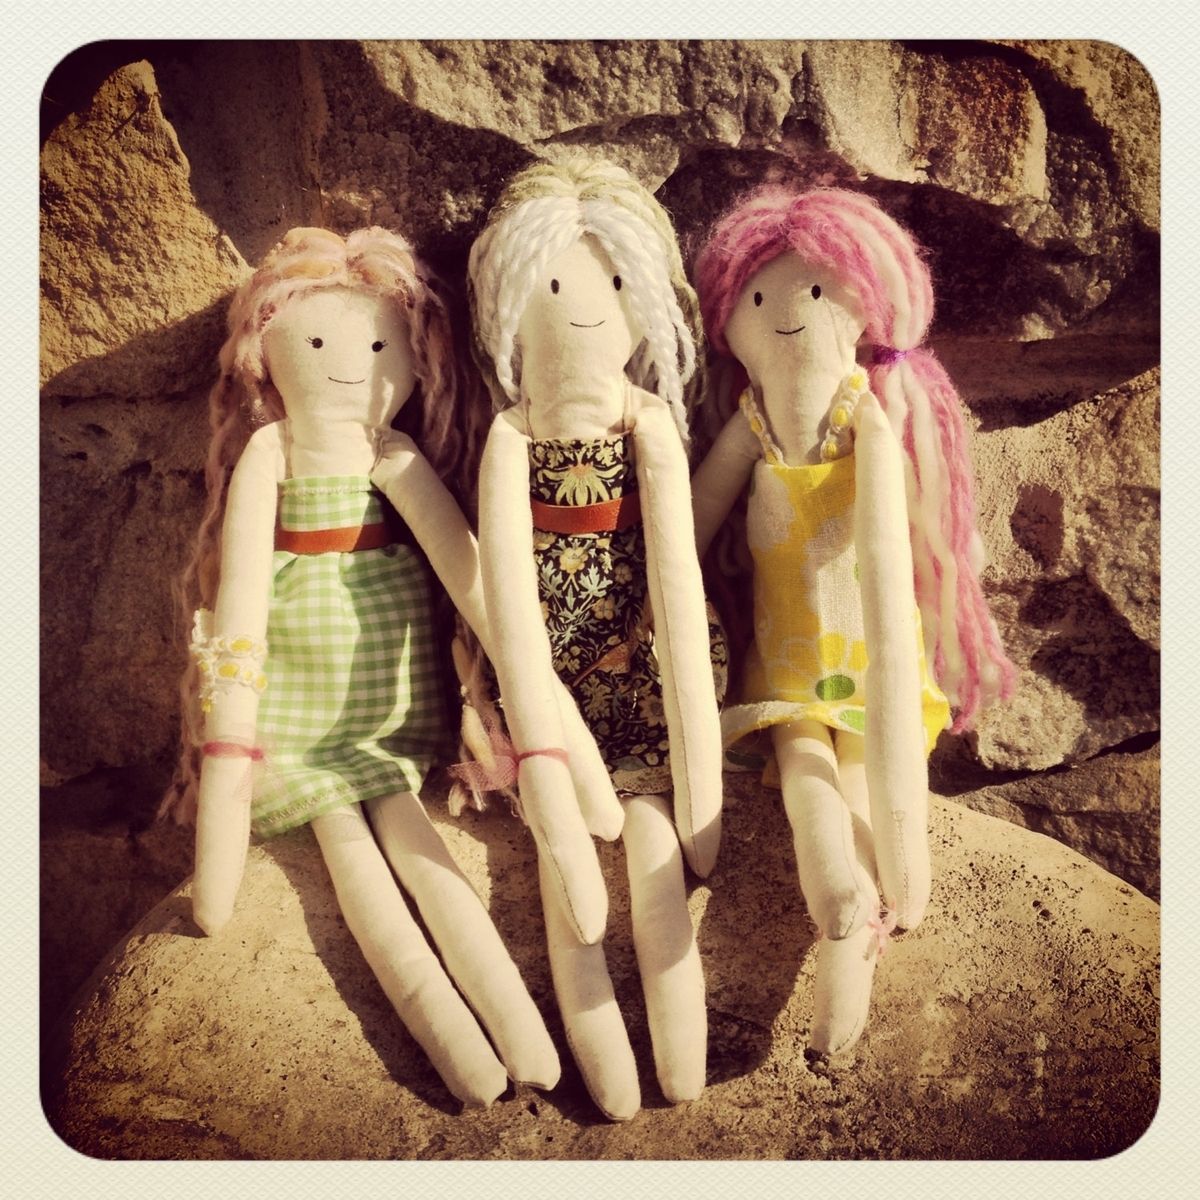 Handpainted wooden bead doll ~ Liberty London and Lecien fabric